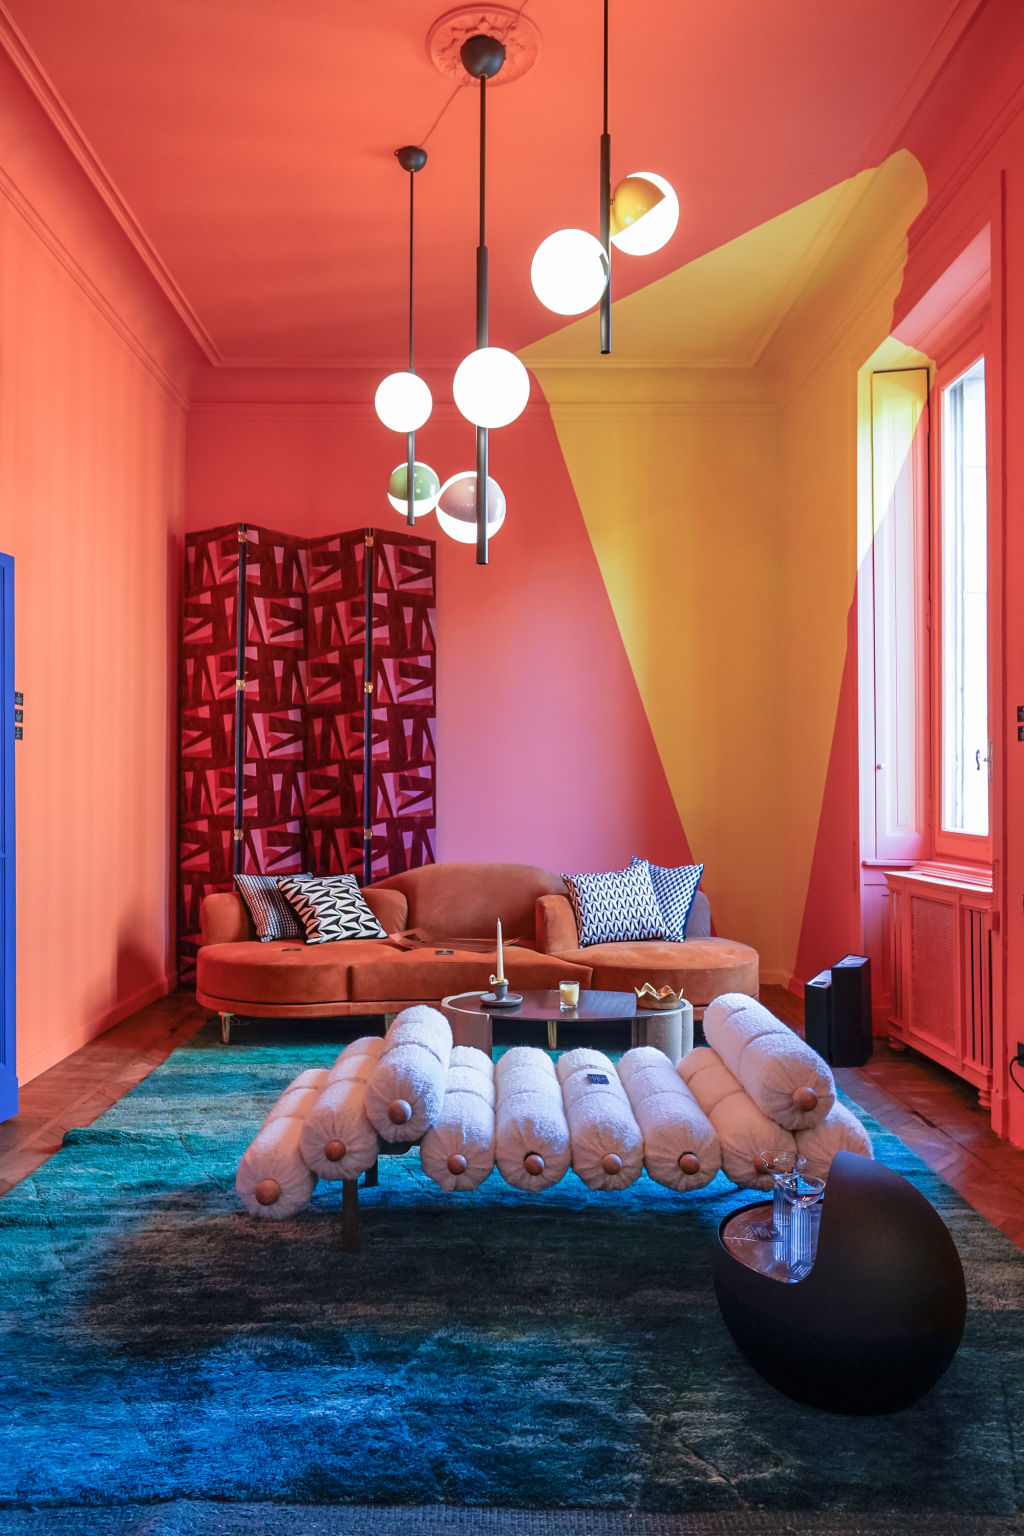 Bright colours at Palermouno Gallery. Photo: Nick Hughes / Yellowtrace